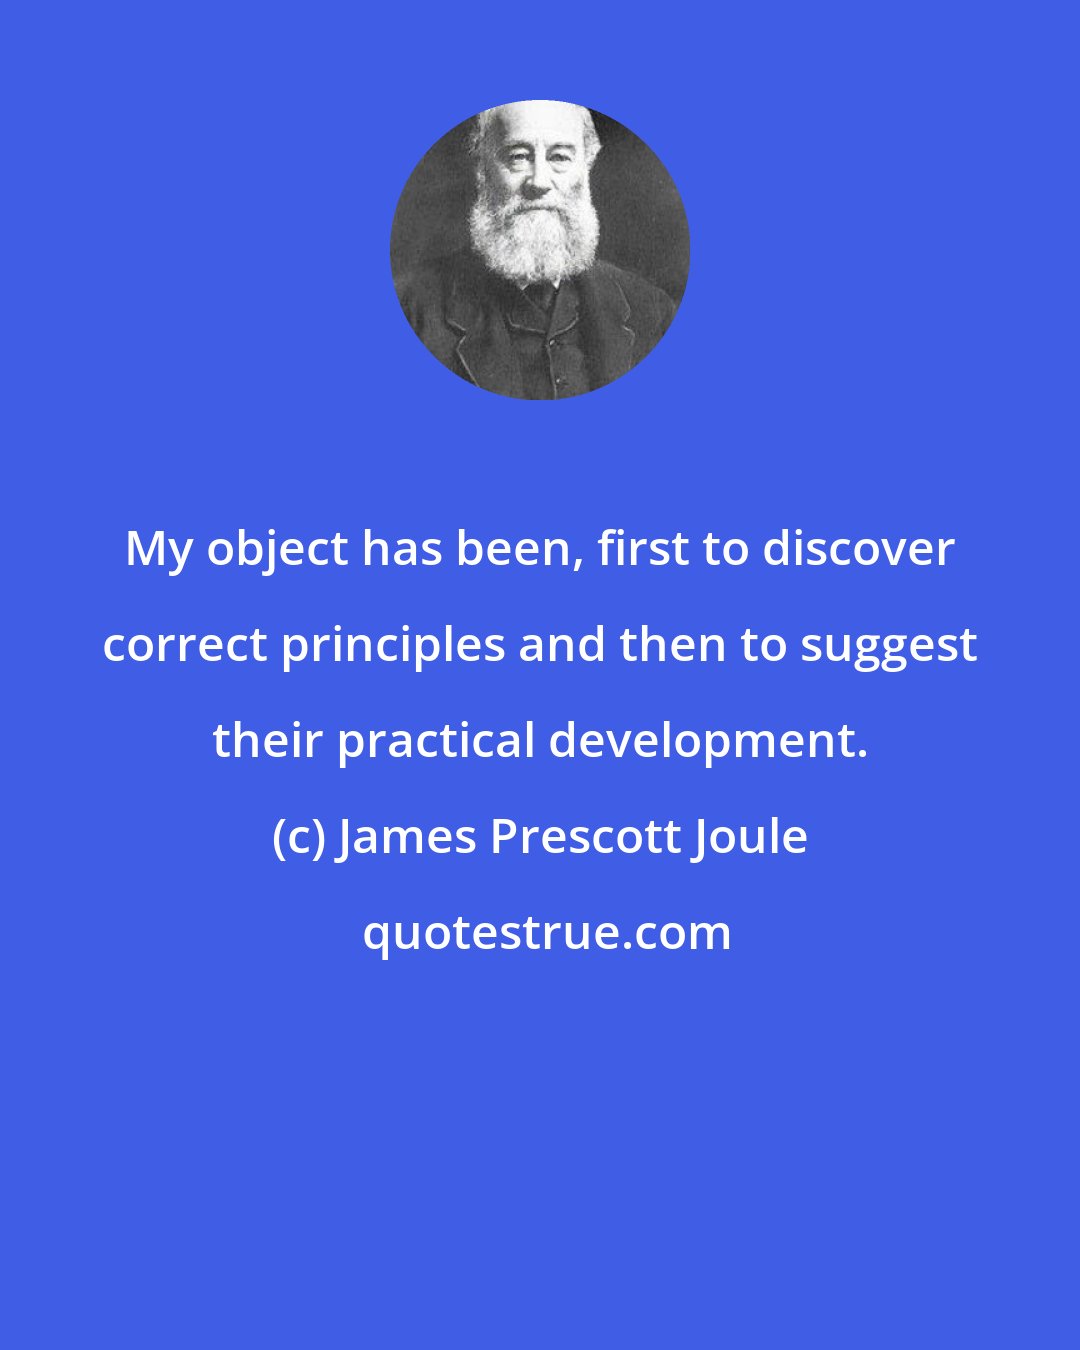 James Prescott Joule: My object has been, first to discover correct principles and then to suggest their practical development.